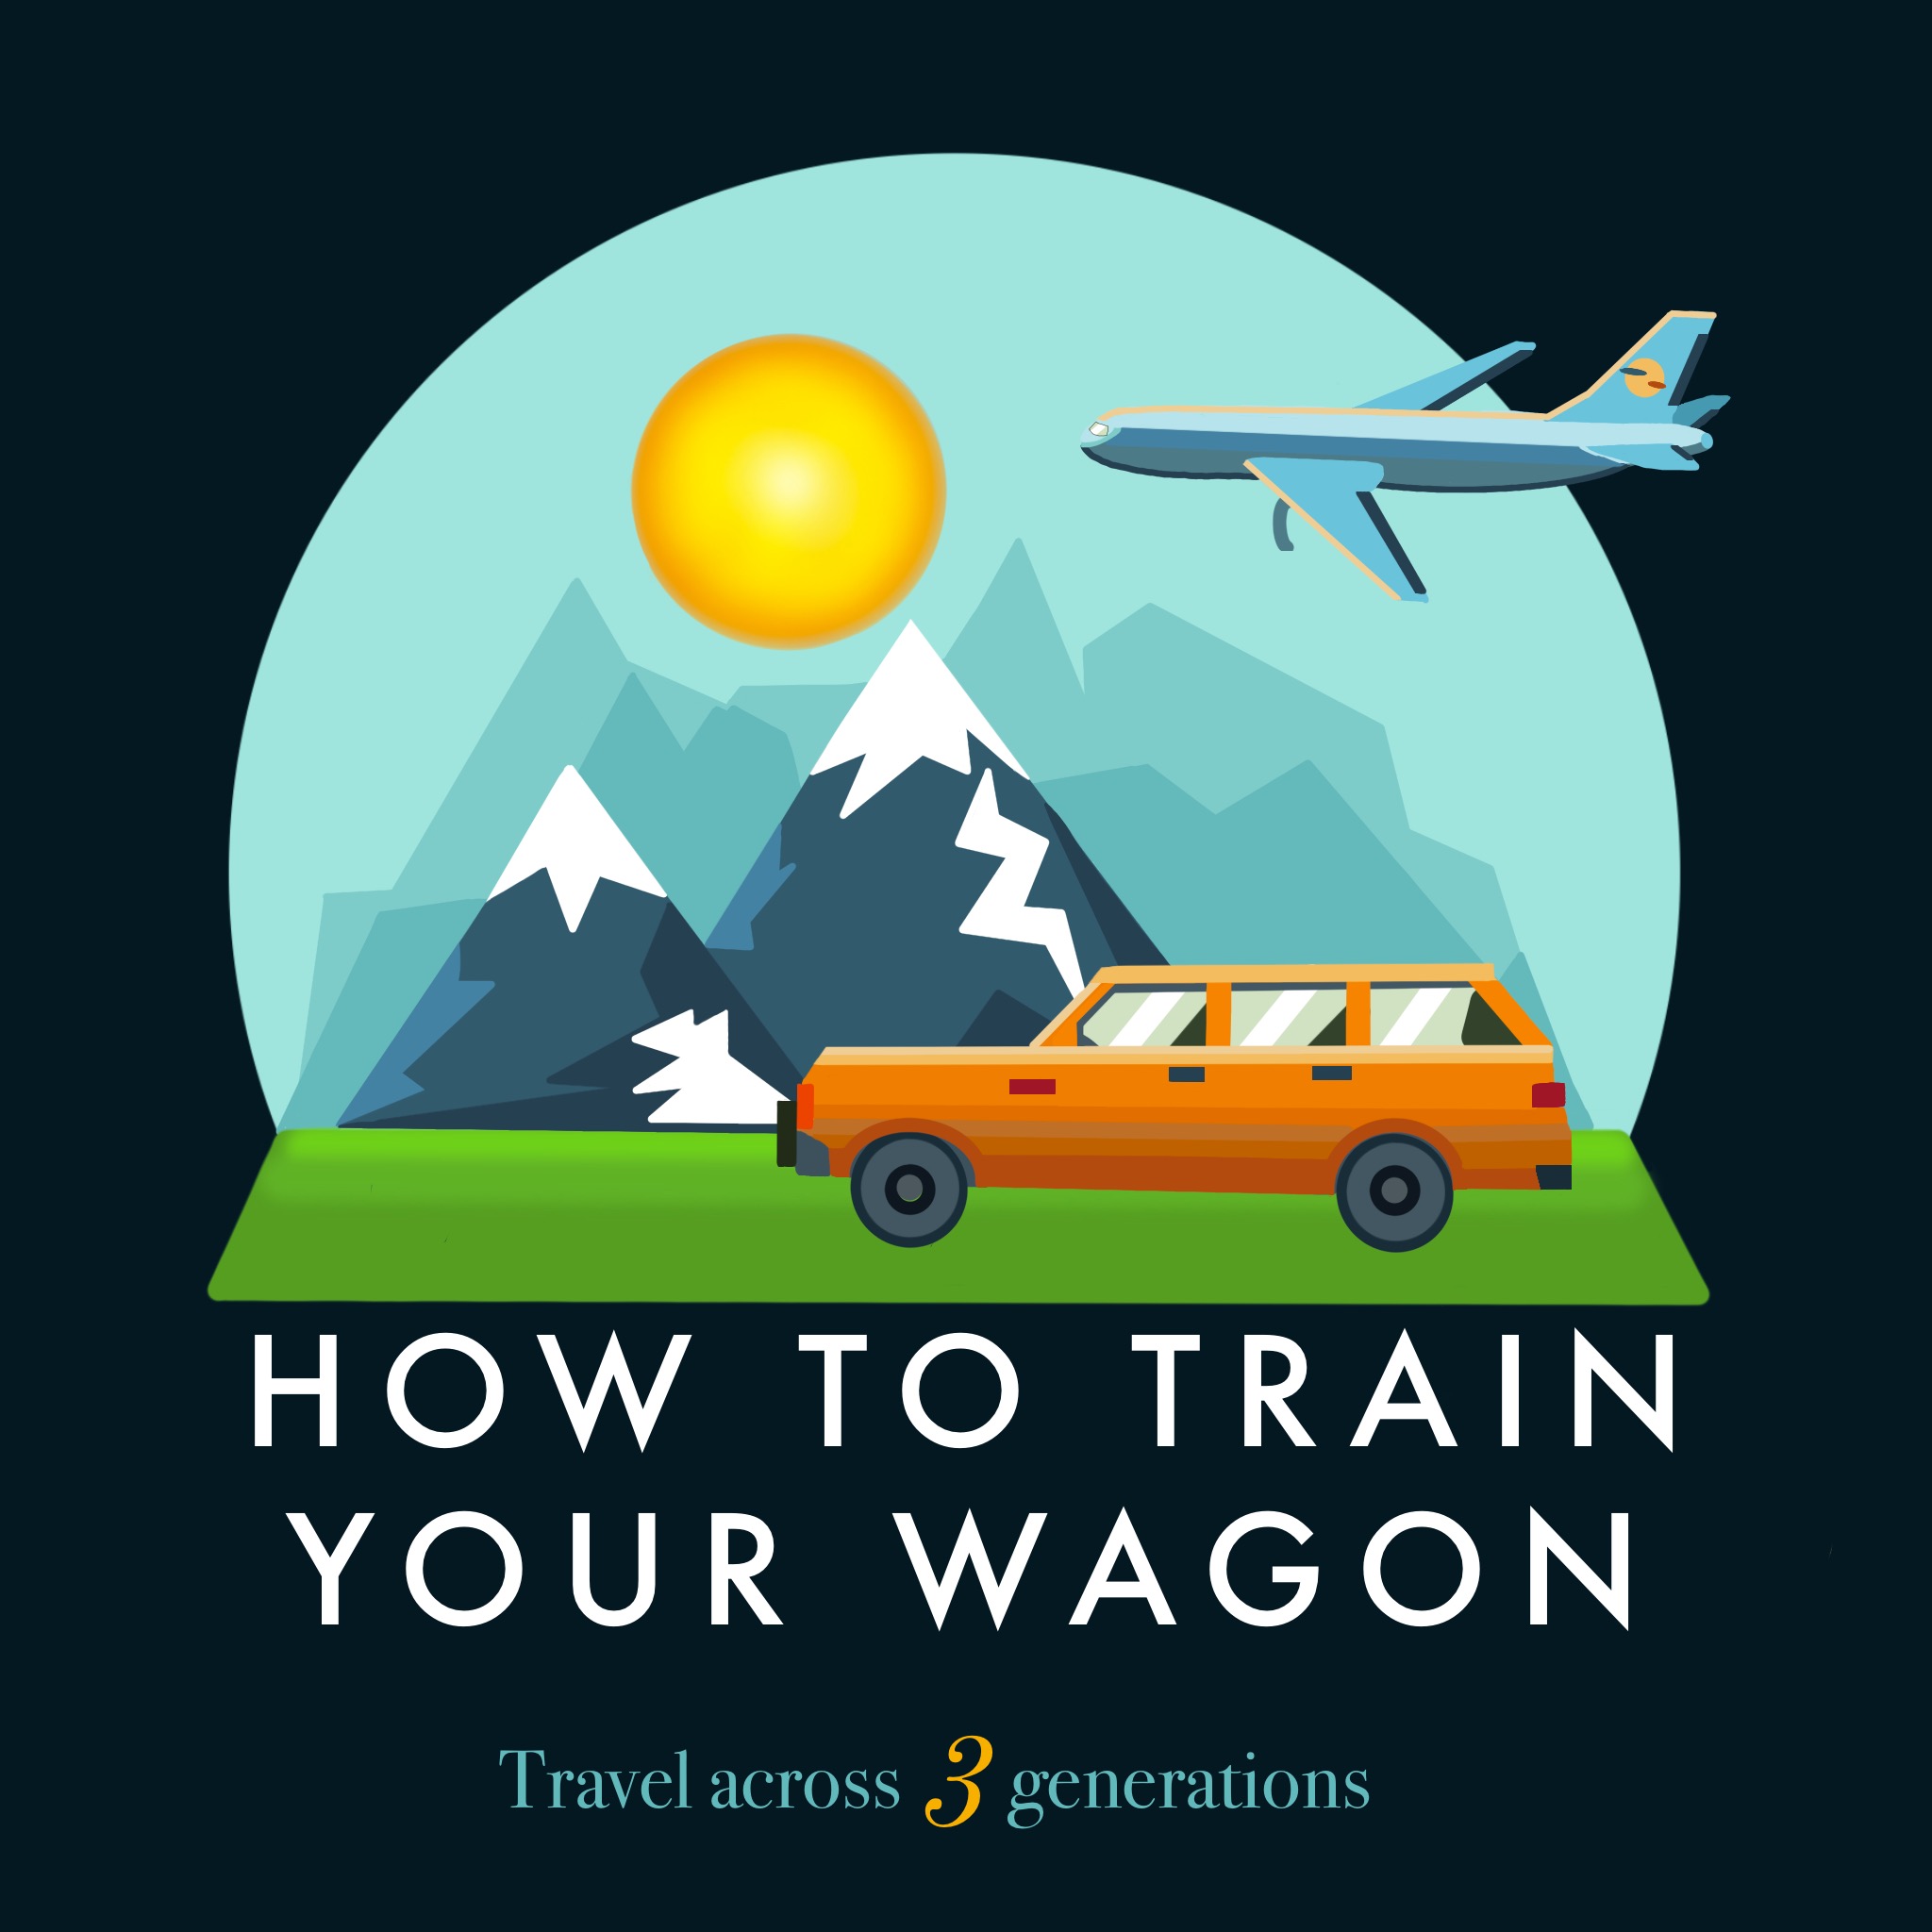 How to Train Your Wagon